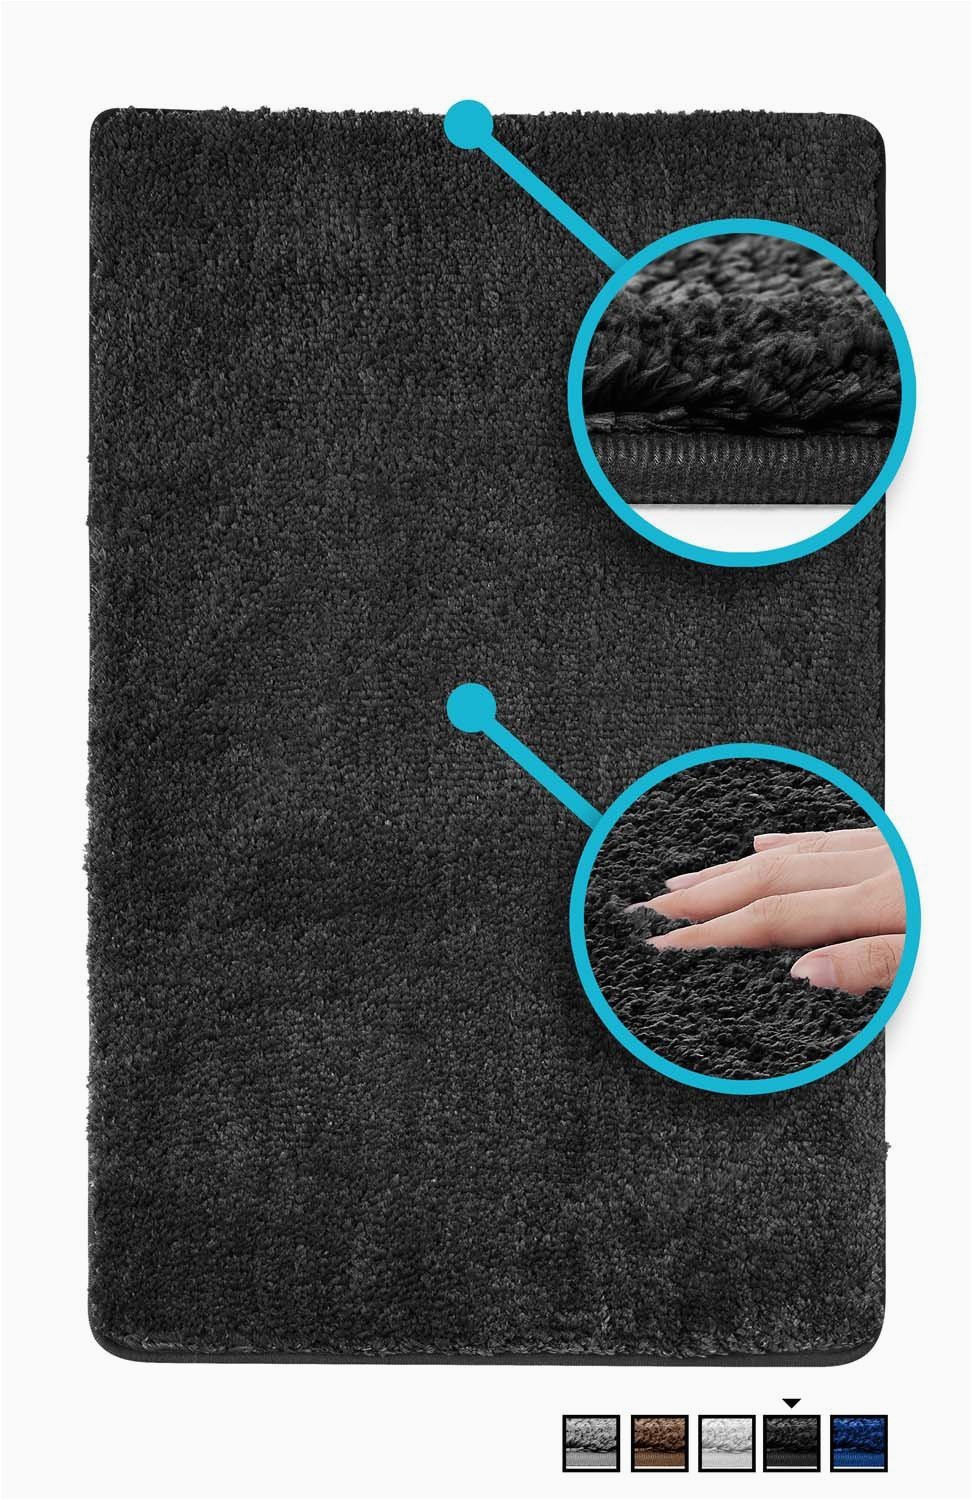 Bathroom Rugs Non Slip Backing Luxe Rug Luxuriously Plush Microfiber Bathroom Rugs Non Slip Backing 19 5 X 31 5 In